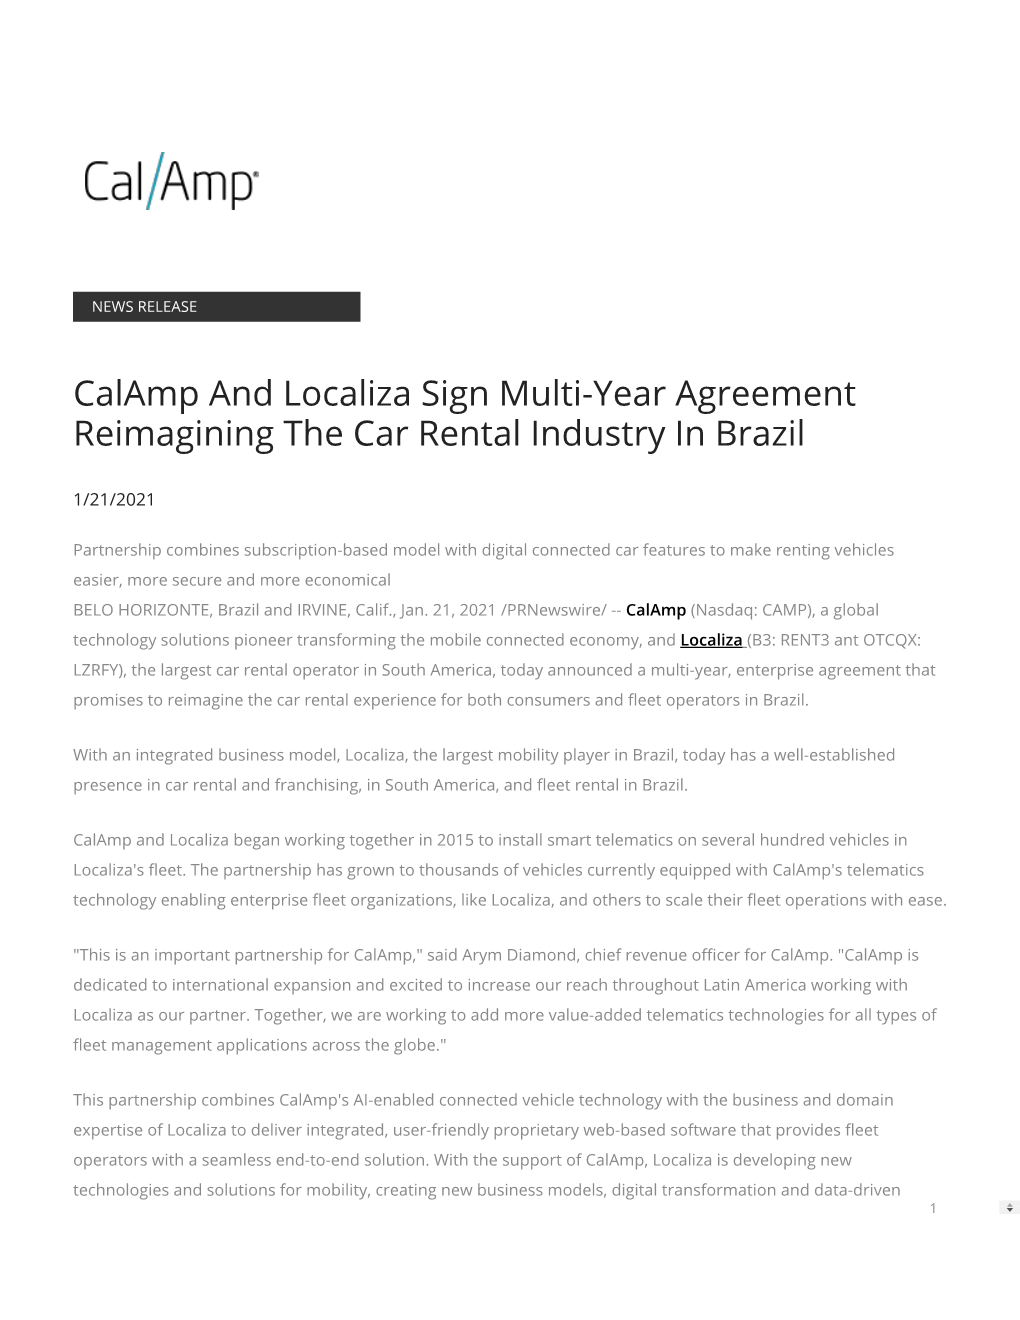 Calamp and Localiza Sign Multi-Year Agreement Reimagining the Car Rental Industry in Brazil